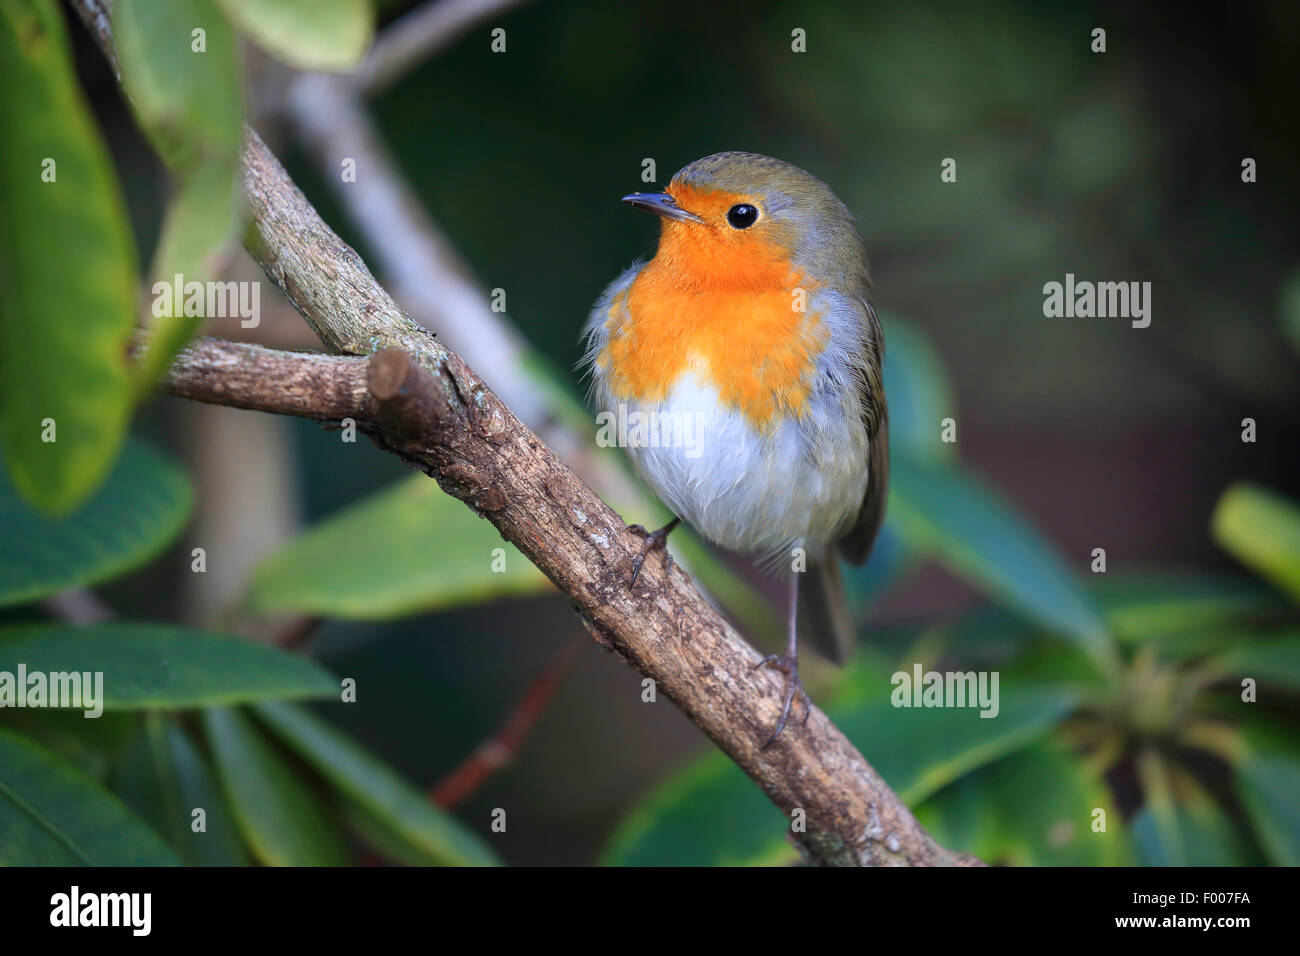 European robin (Erithacus rubecula), on a branch, Germany Stock Photo